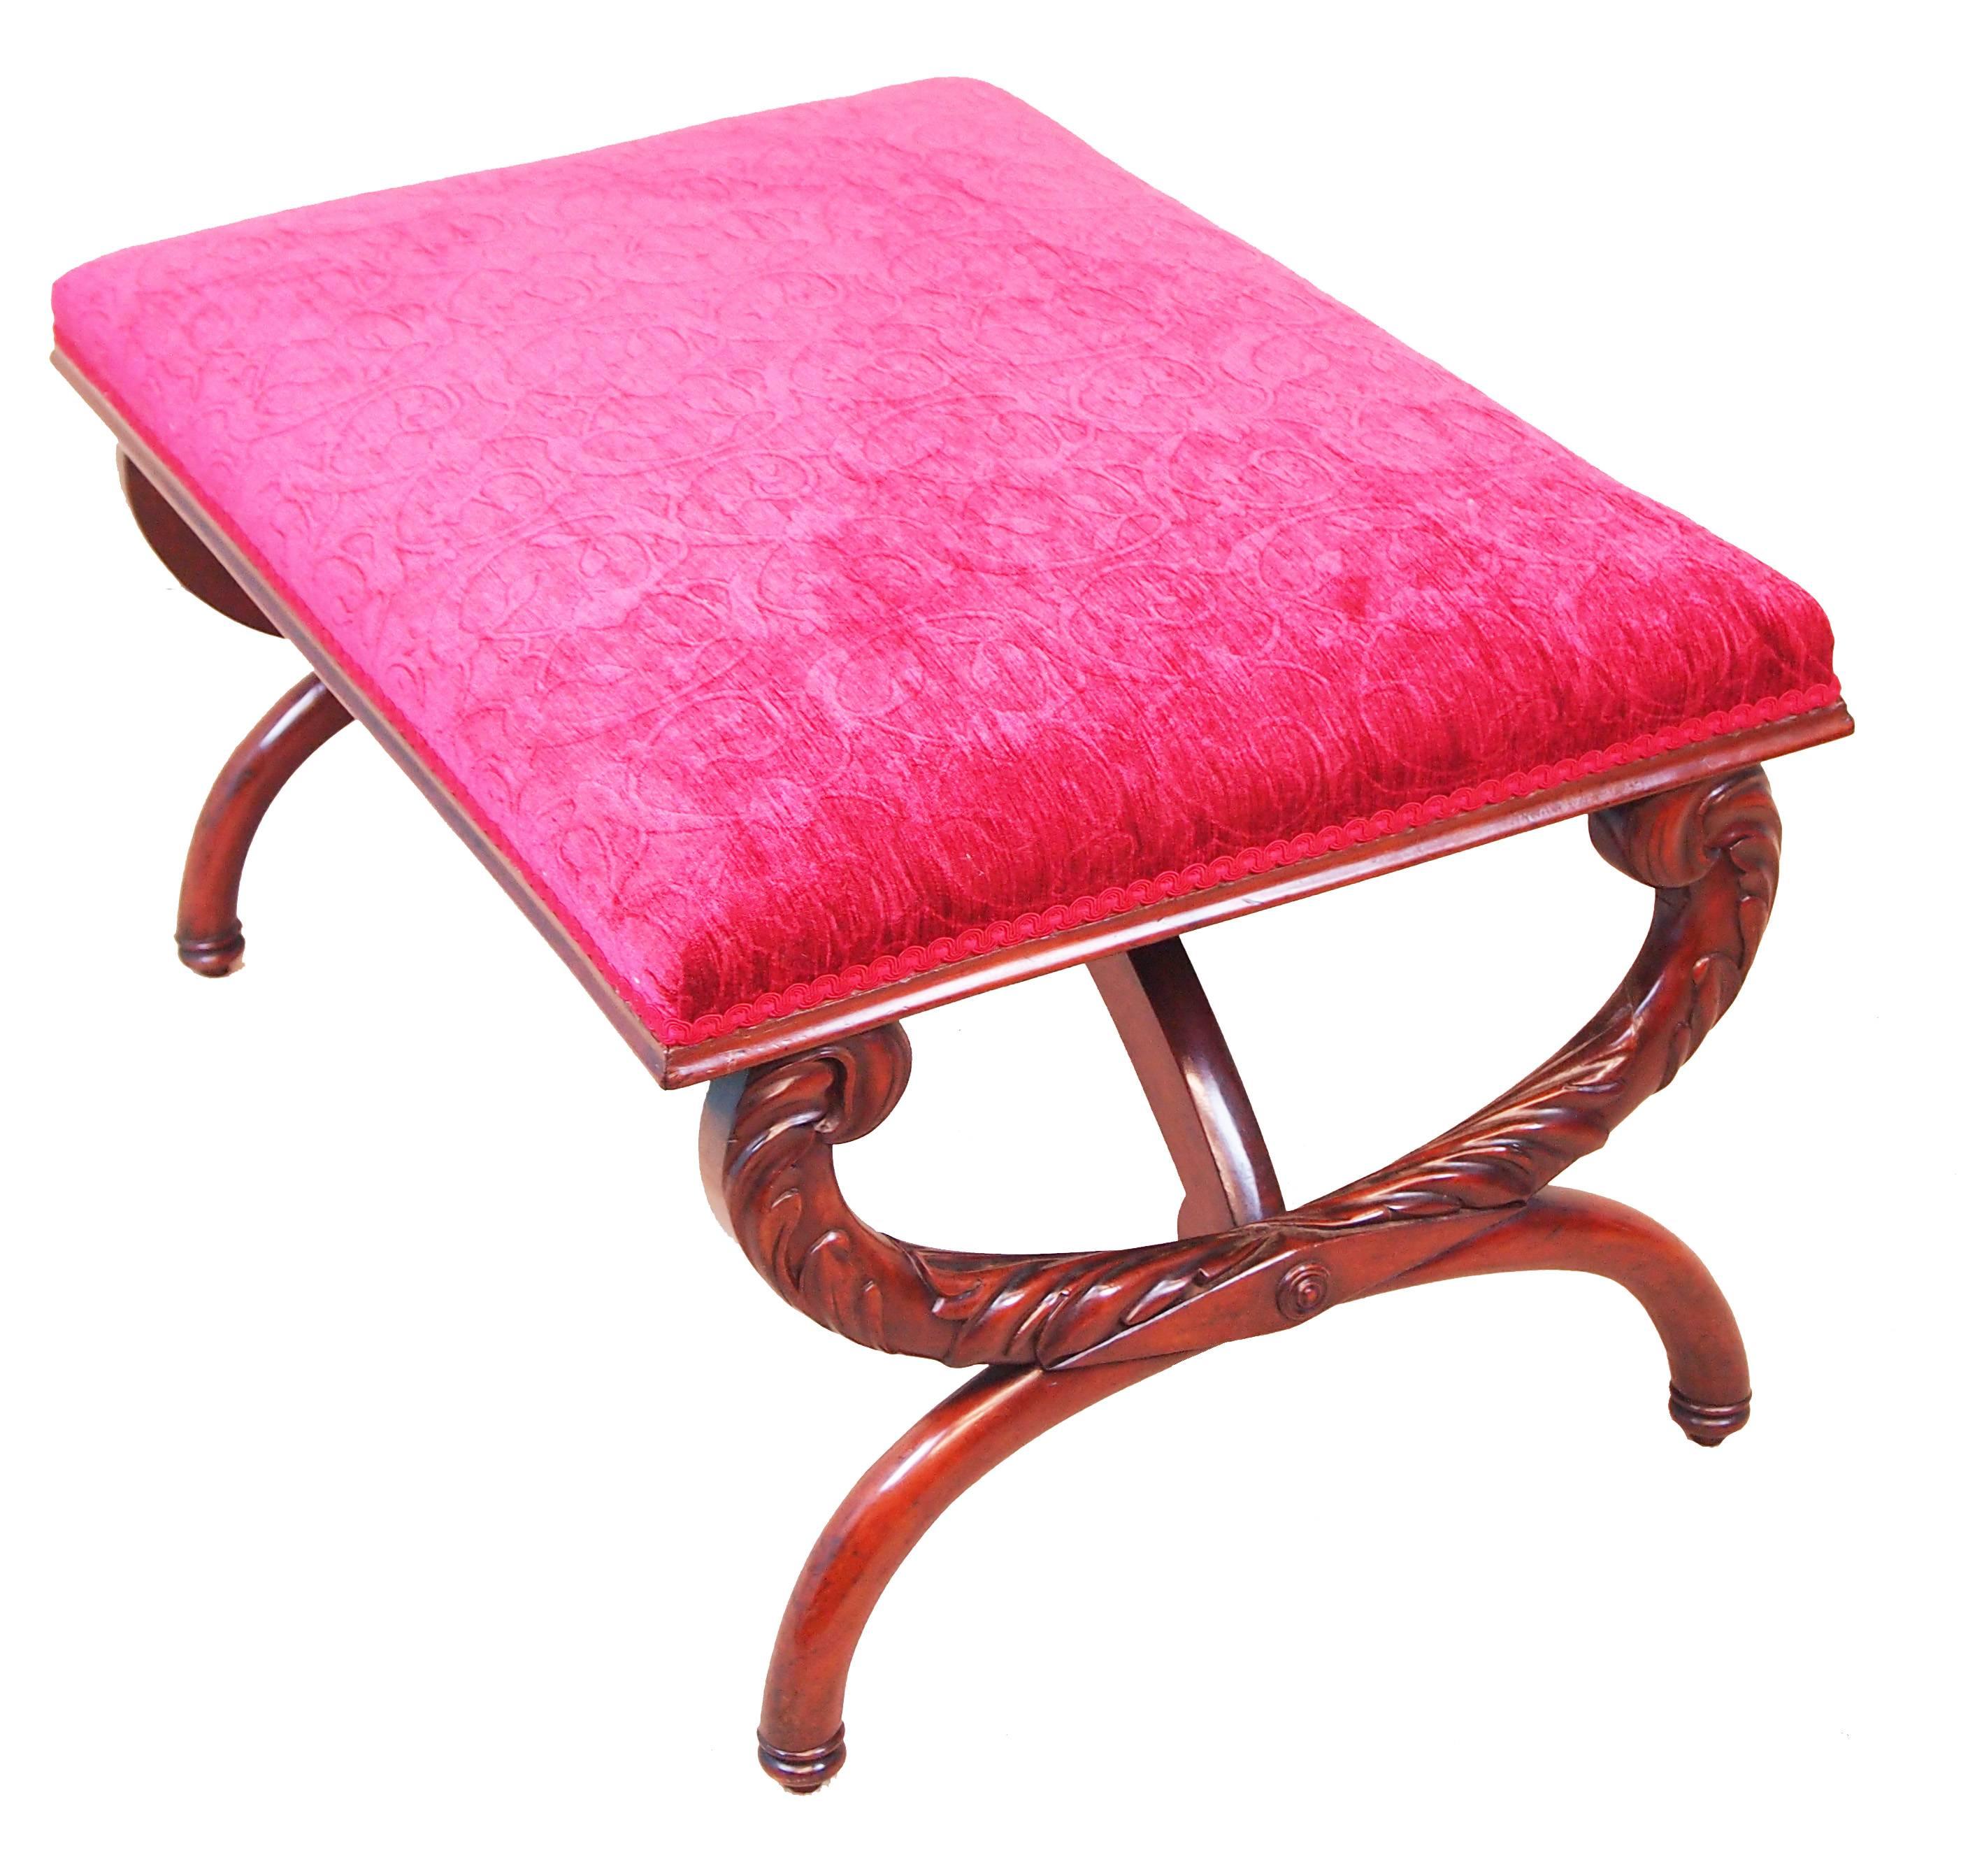 A very good quality mid-19th century mahogany salon stool
having rectangular top raised on elegant X framed end
supports with attractive carved decoration

(An elegant and excellent quality stool in good condition. The
carved decoration is